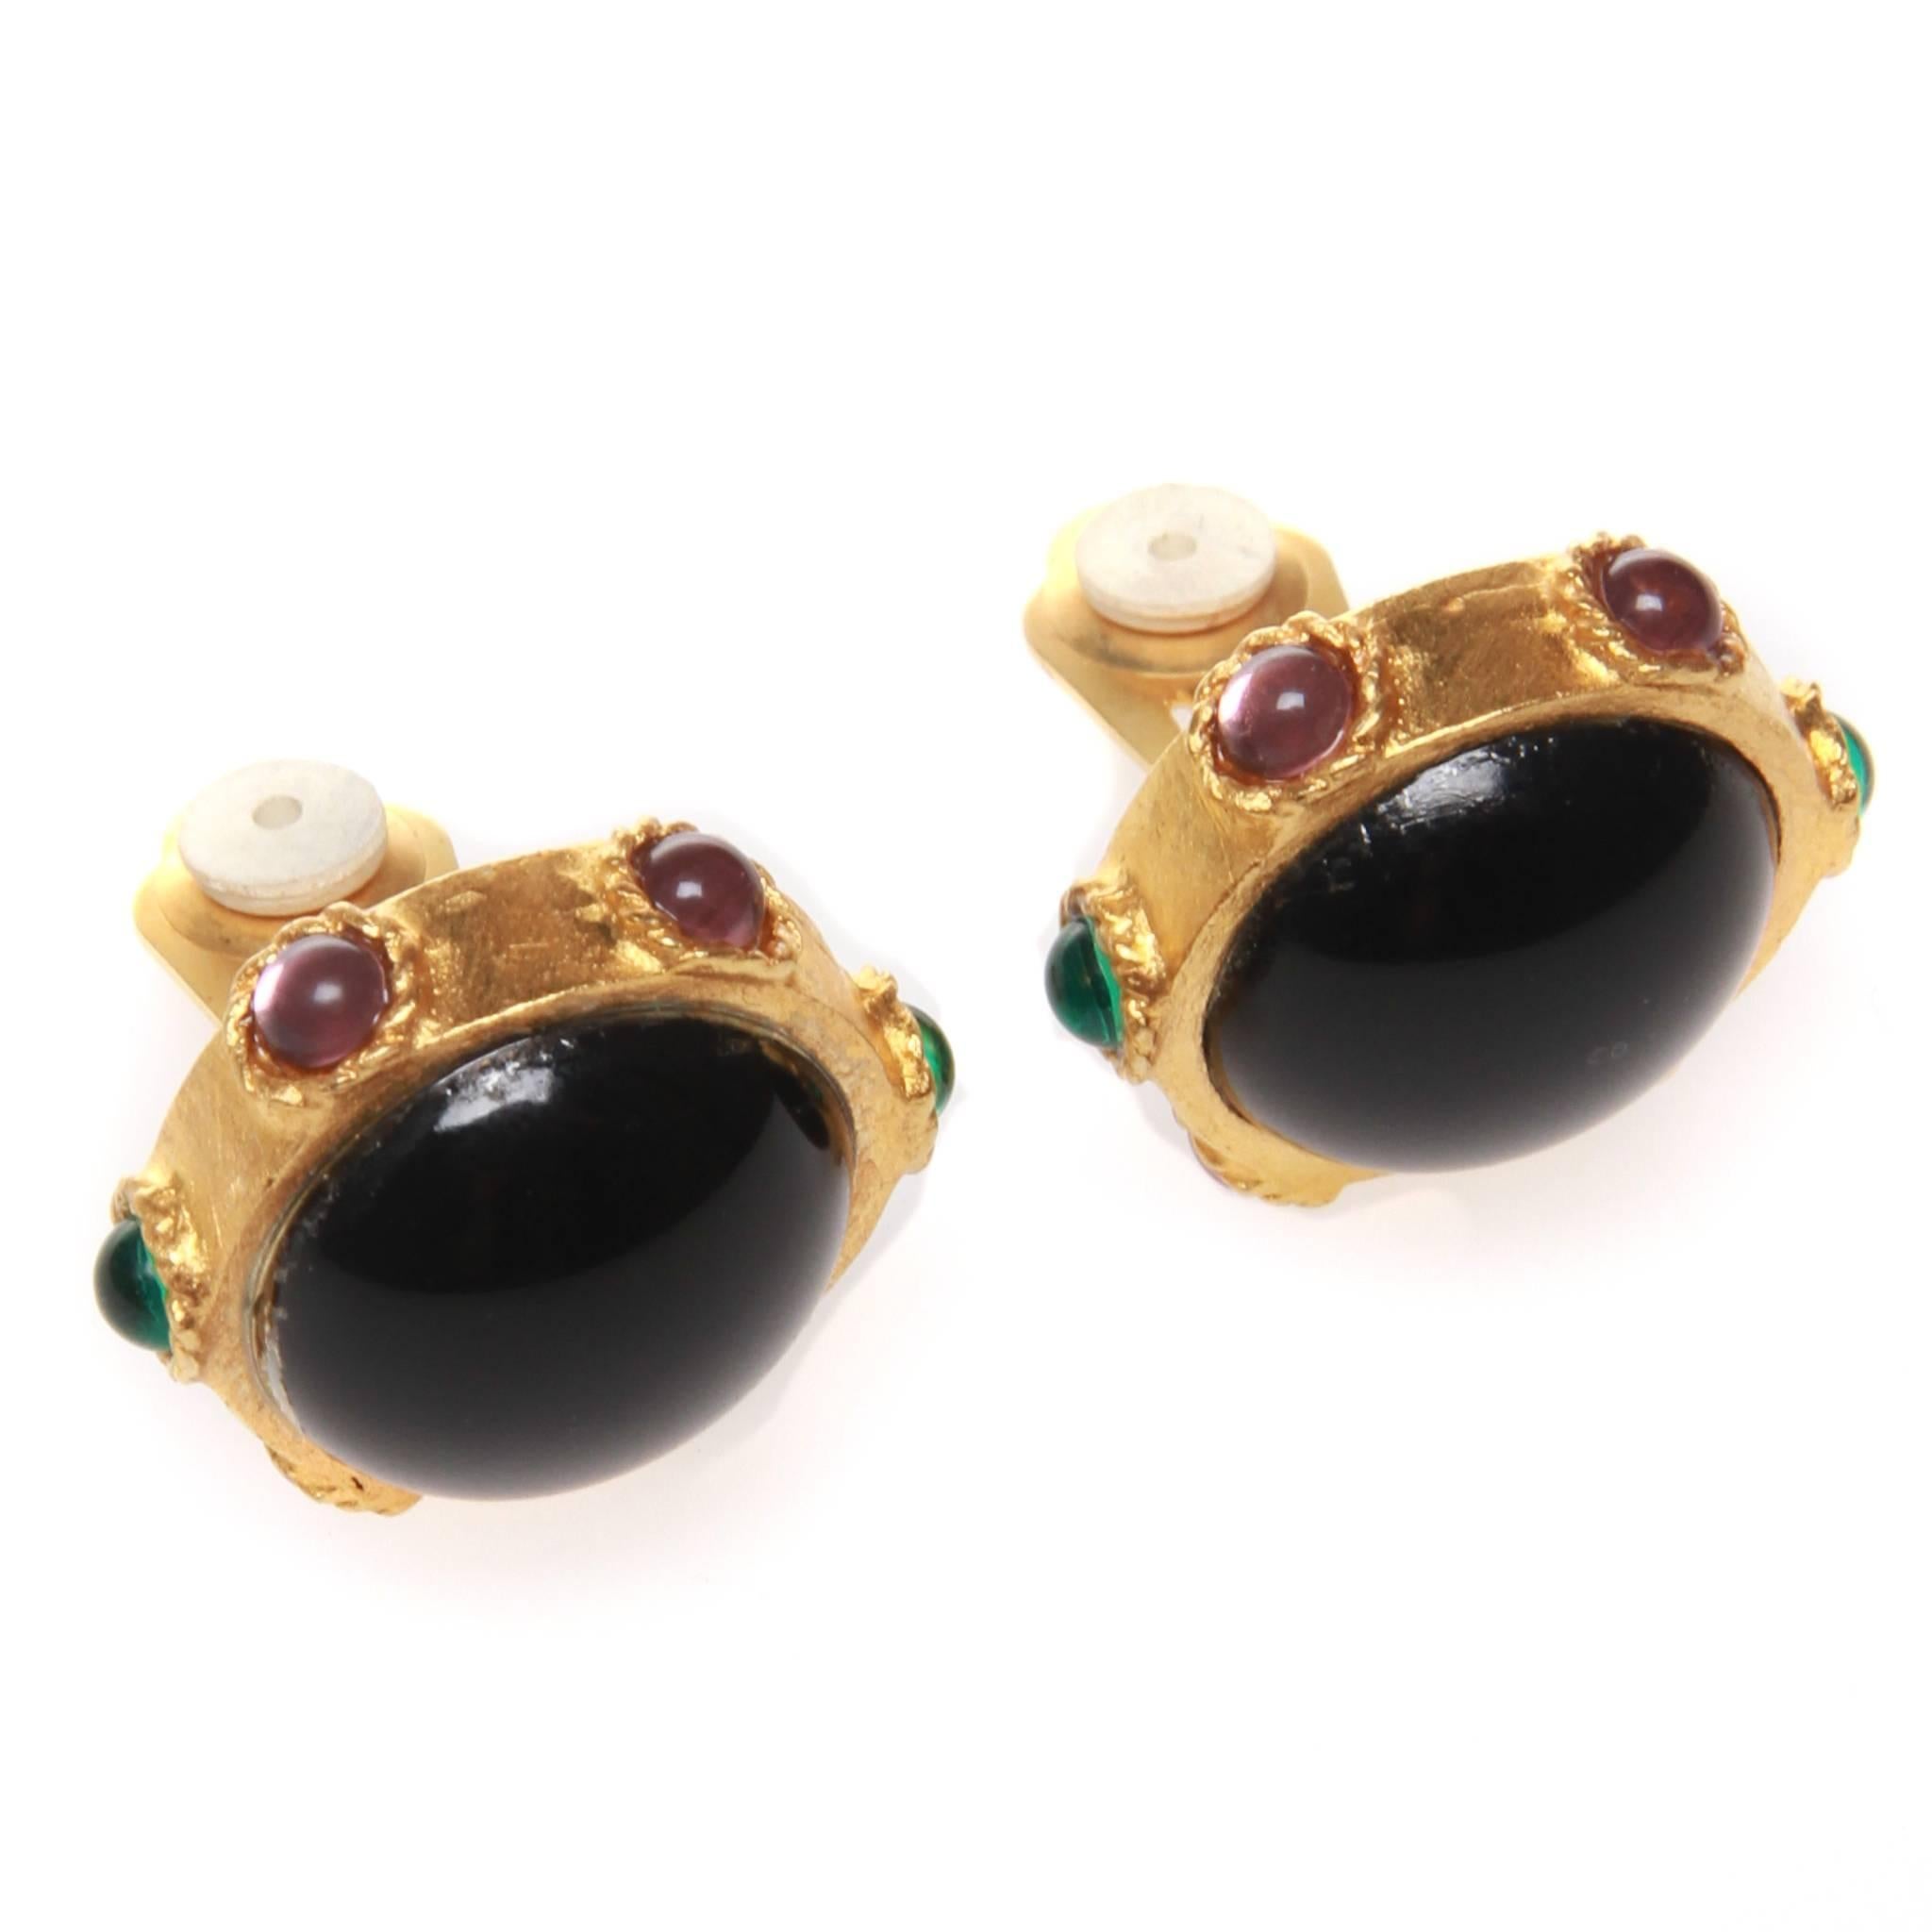 Oscar de la Renta clip-on earrings featuring a circular pattern of coloured glass set in gold-tone metal. OSCAR engraved at back.